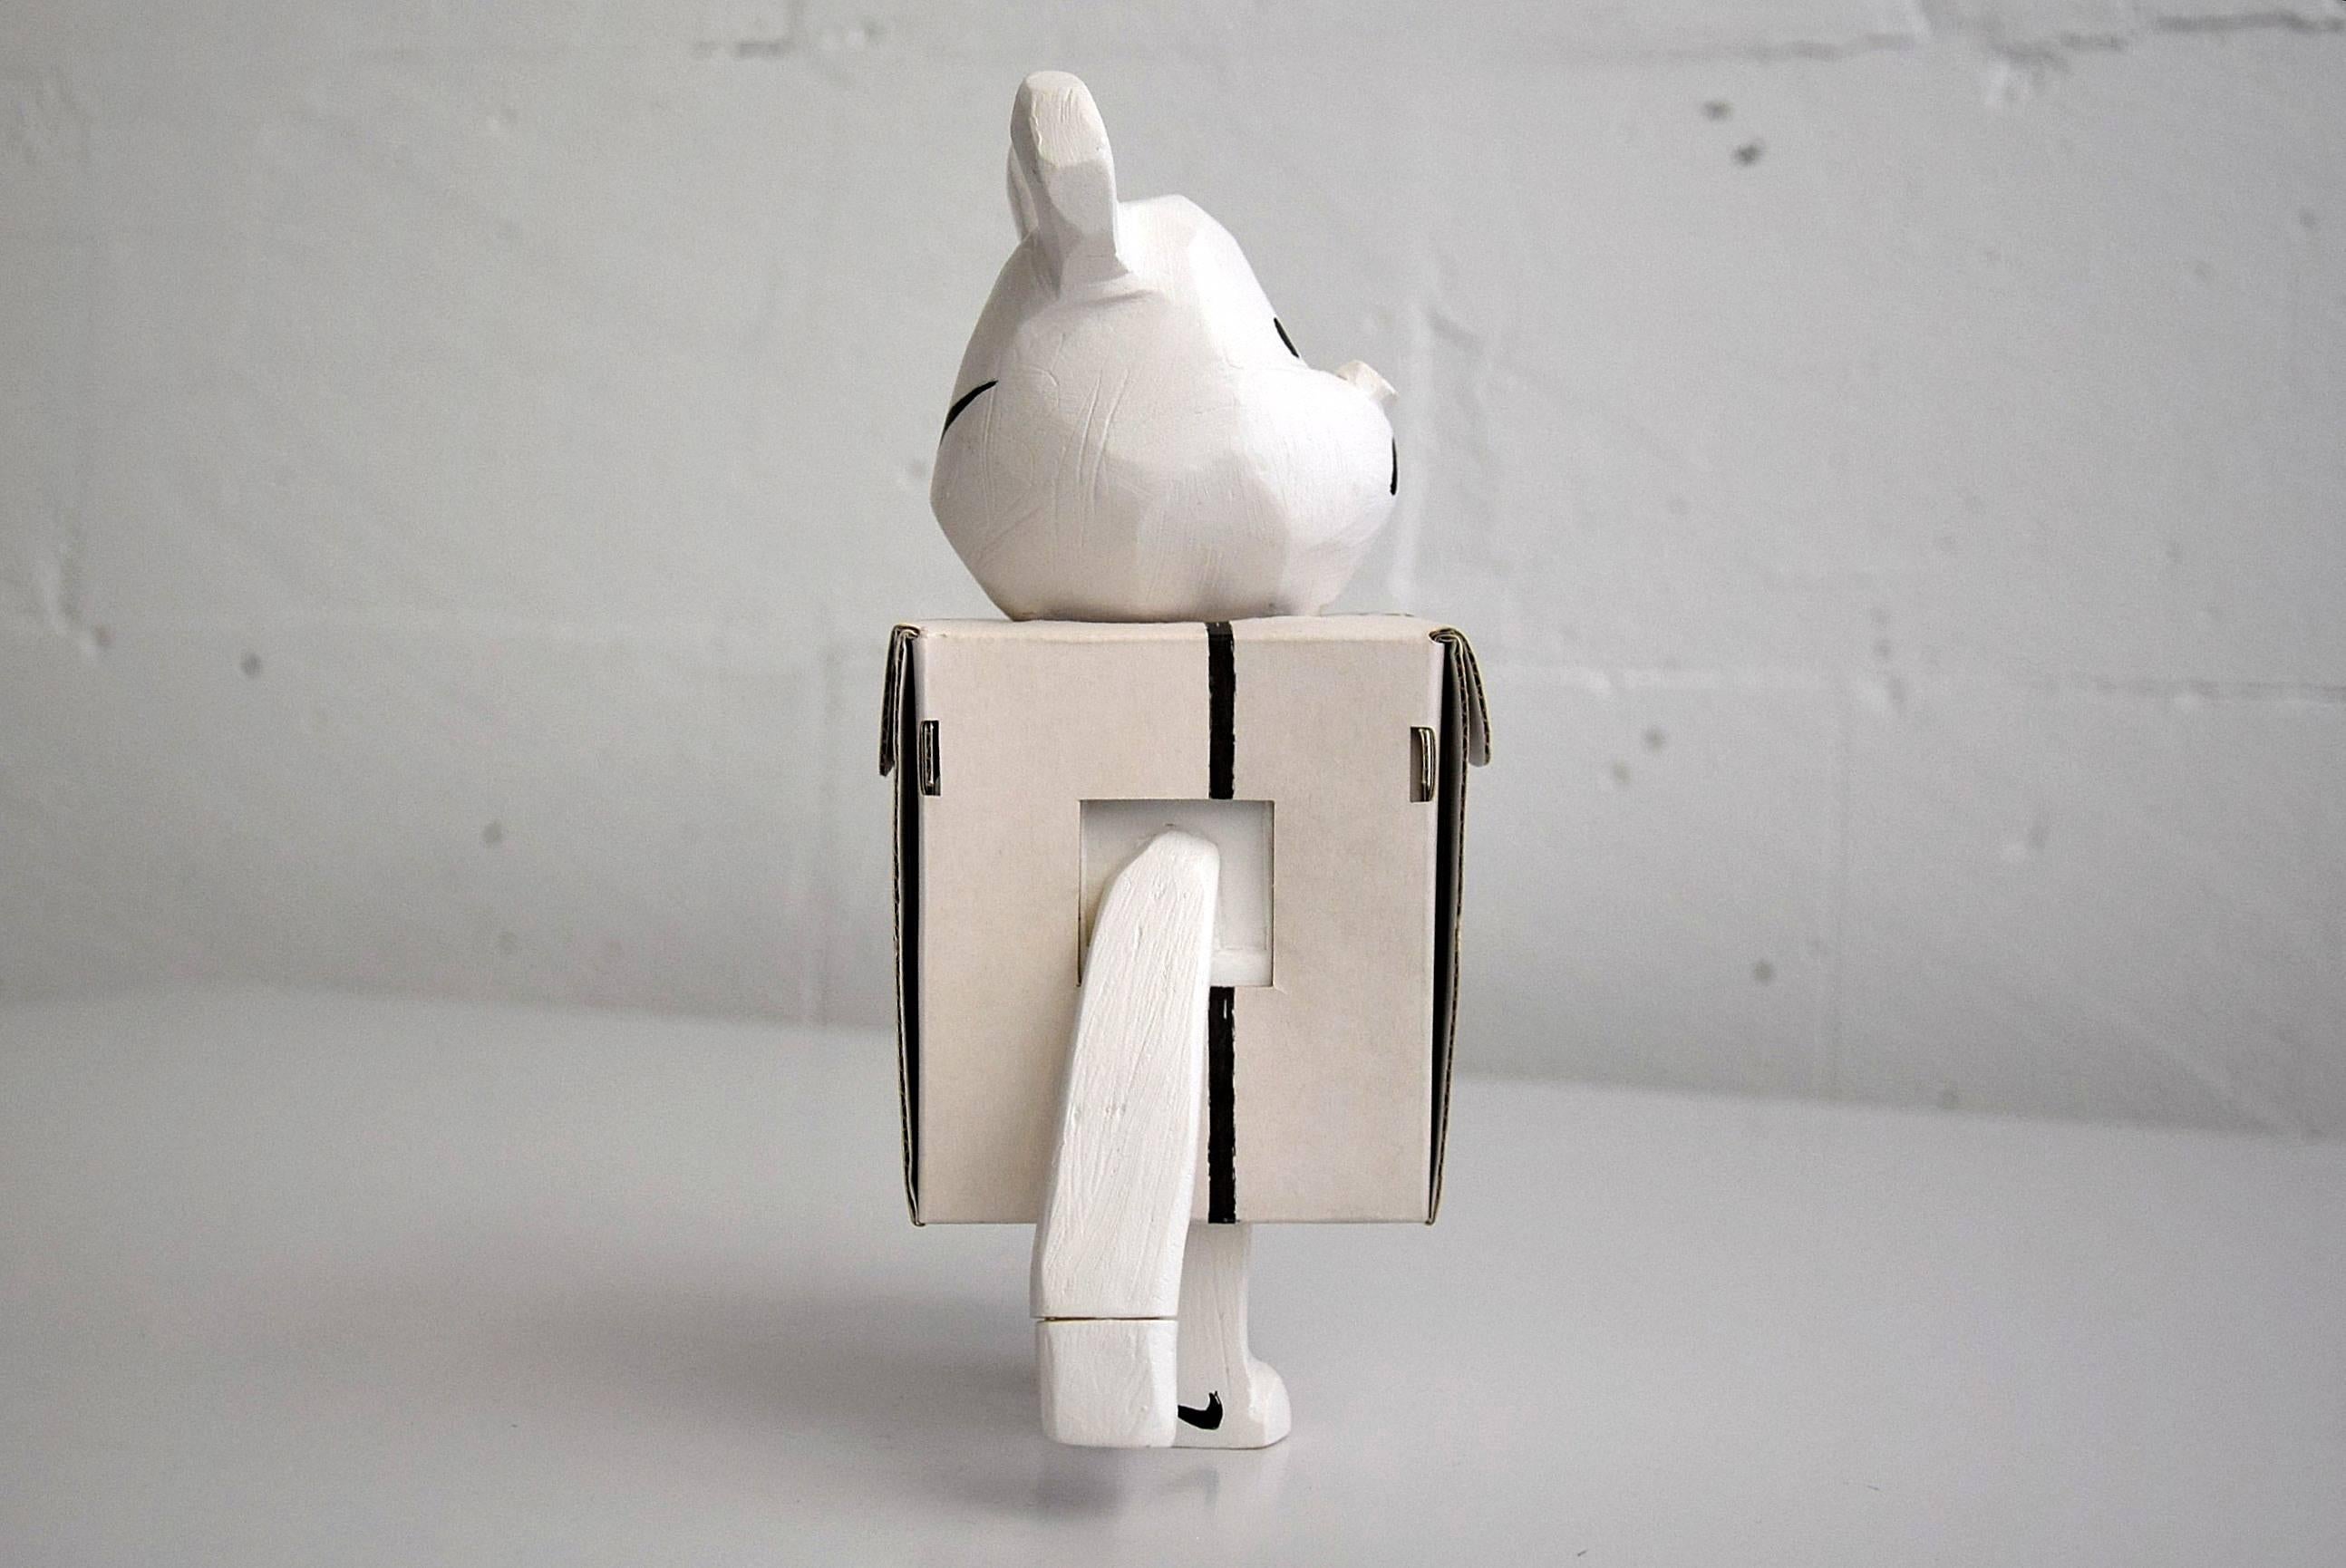 Hong Kong Designer Toy S.F.B.B. 'Sample' by Michael Lau, 2005 For Sale